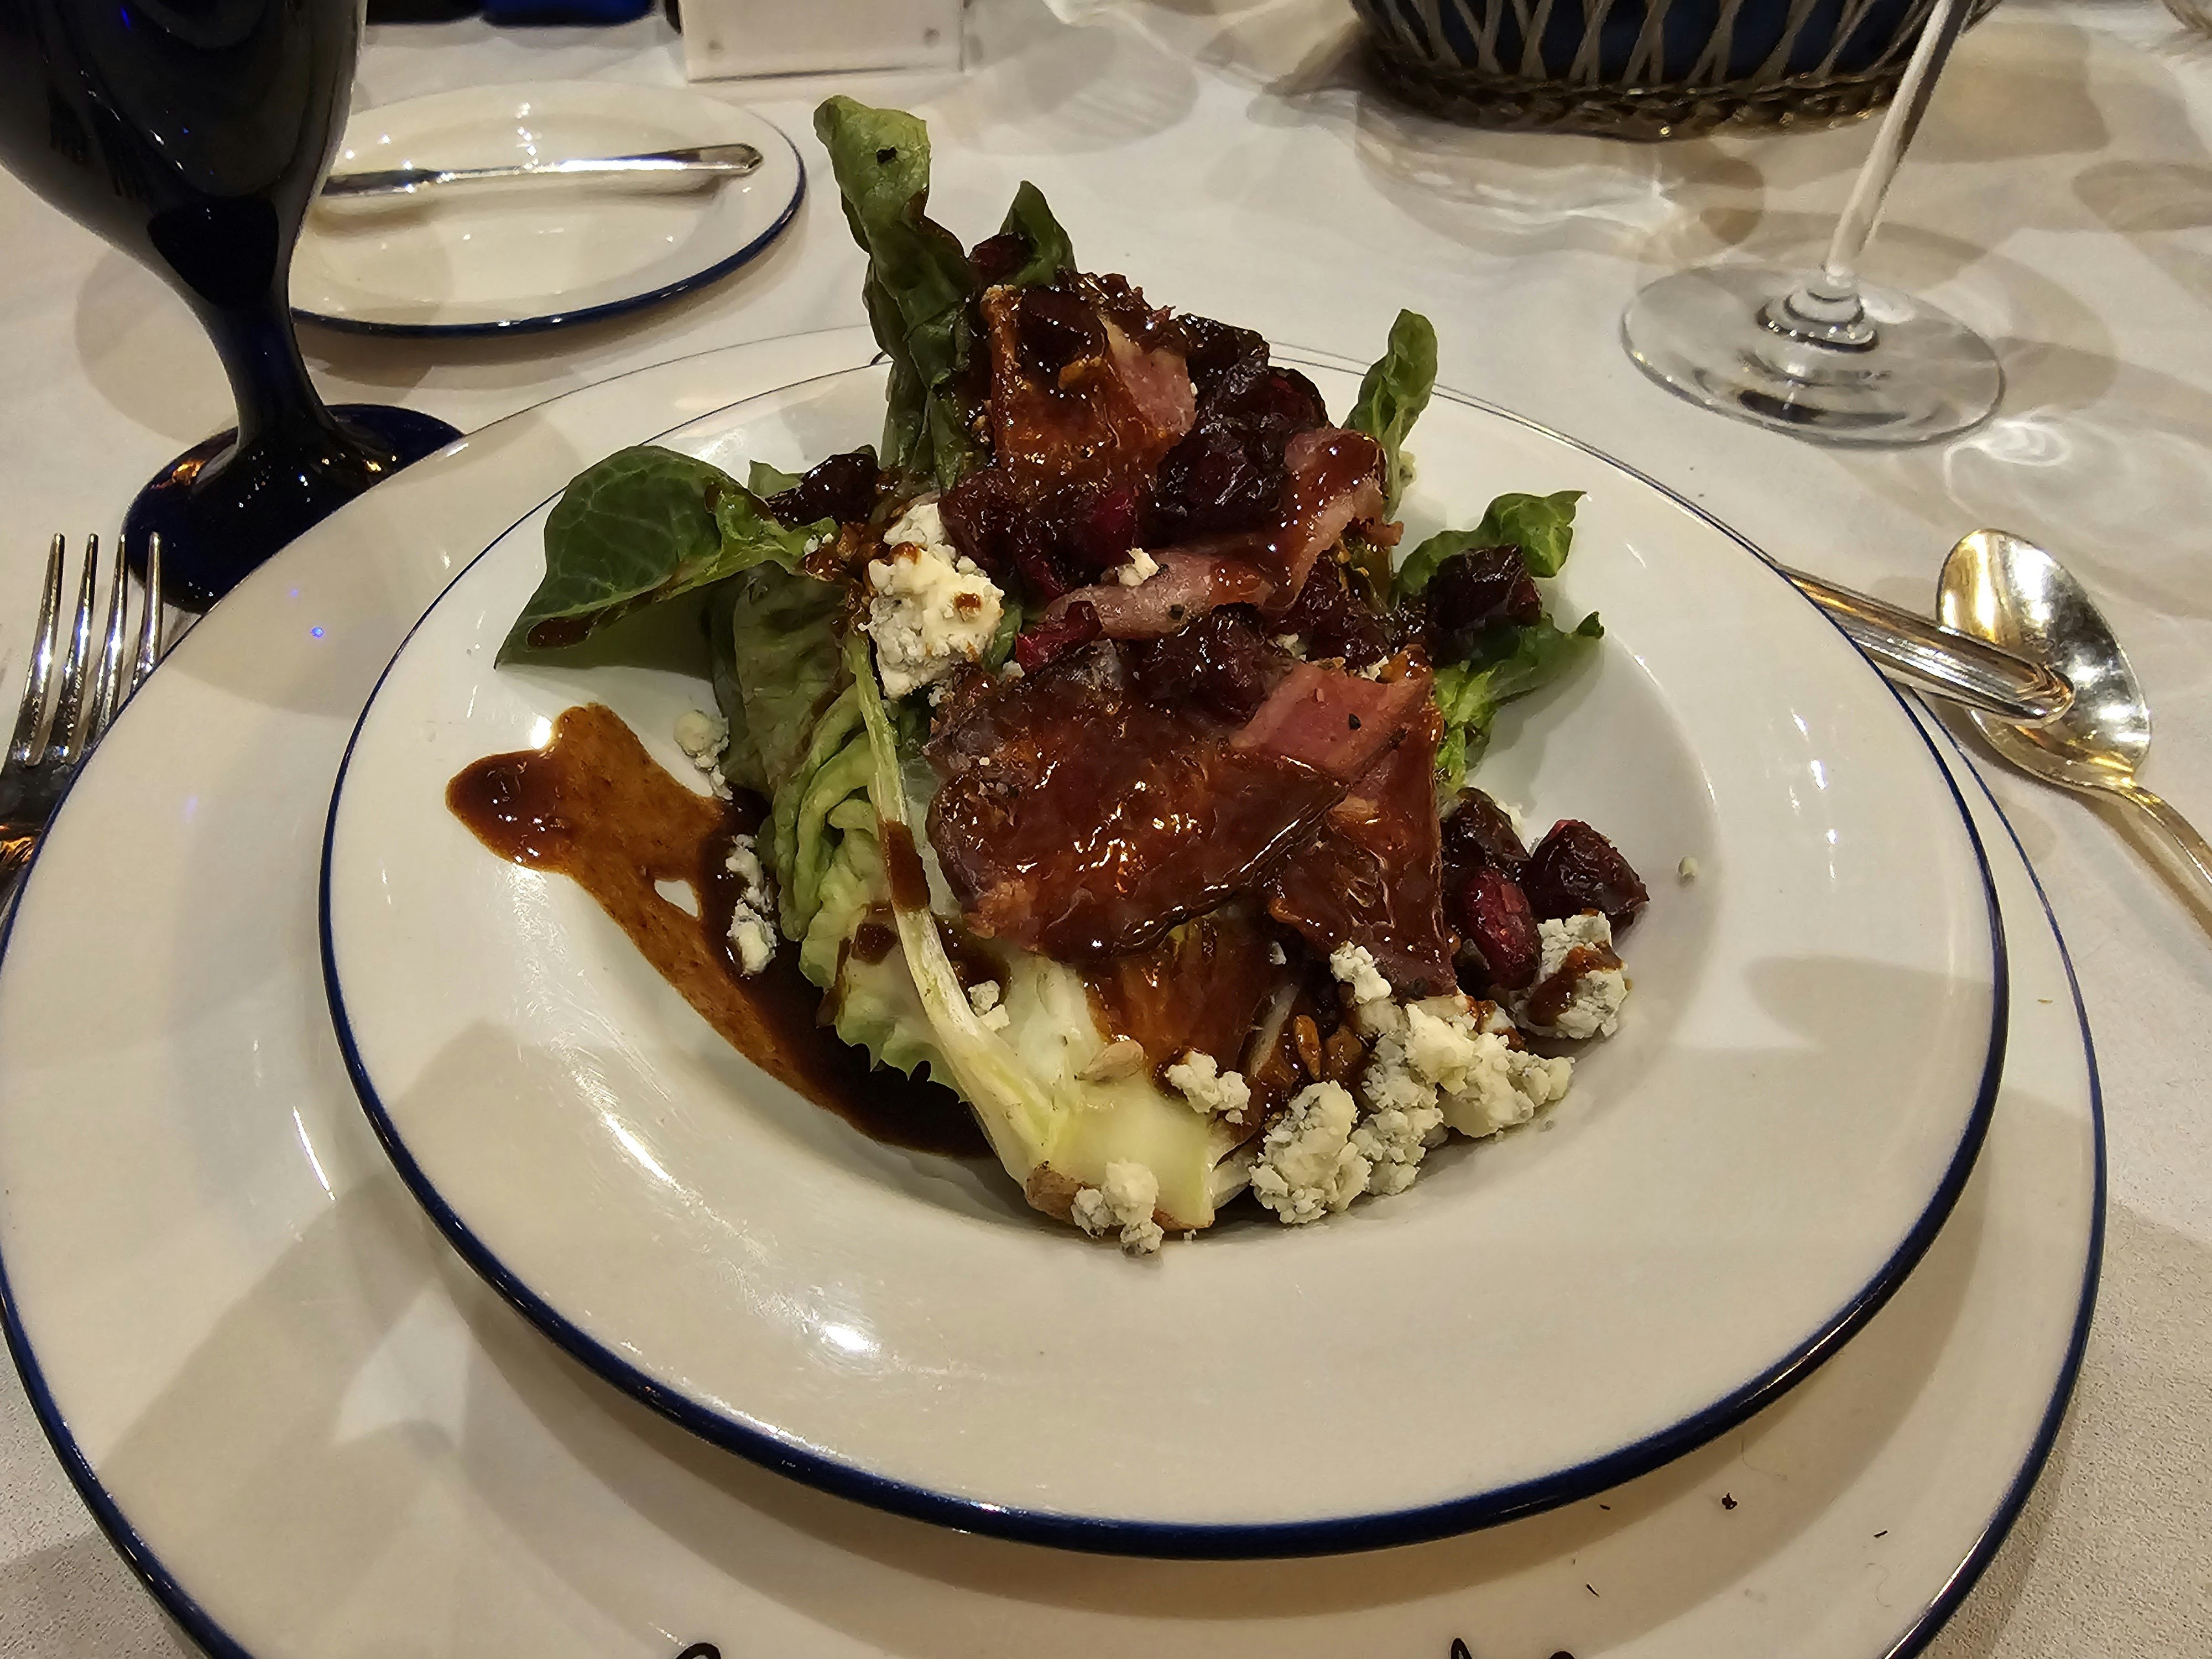 A fresh green salad with blue cheese crumbles, bacon and balsamic vinaigrette.